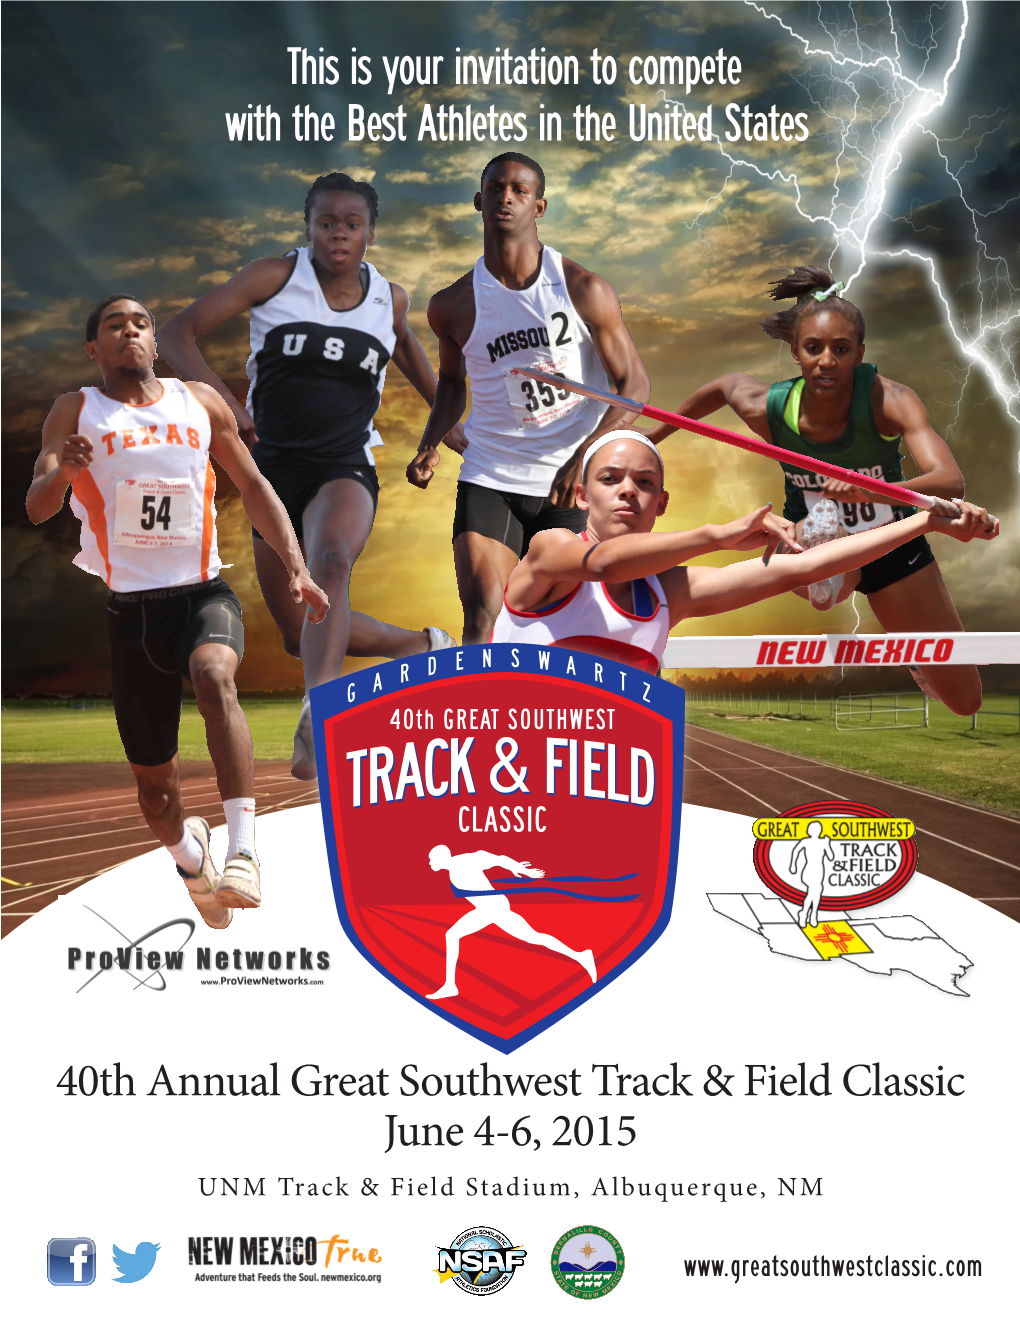 The Crowne Plaza Hotel Is the Exclusive Designated Headquarters for the 40Th Annual Great Southwest 3:50 4 X 100 Meter Relay Age Group Track & Field Classic